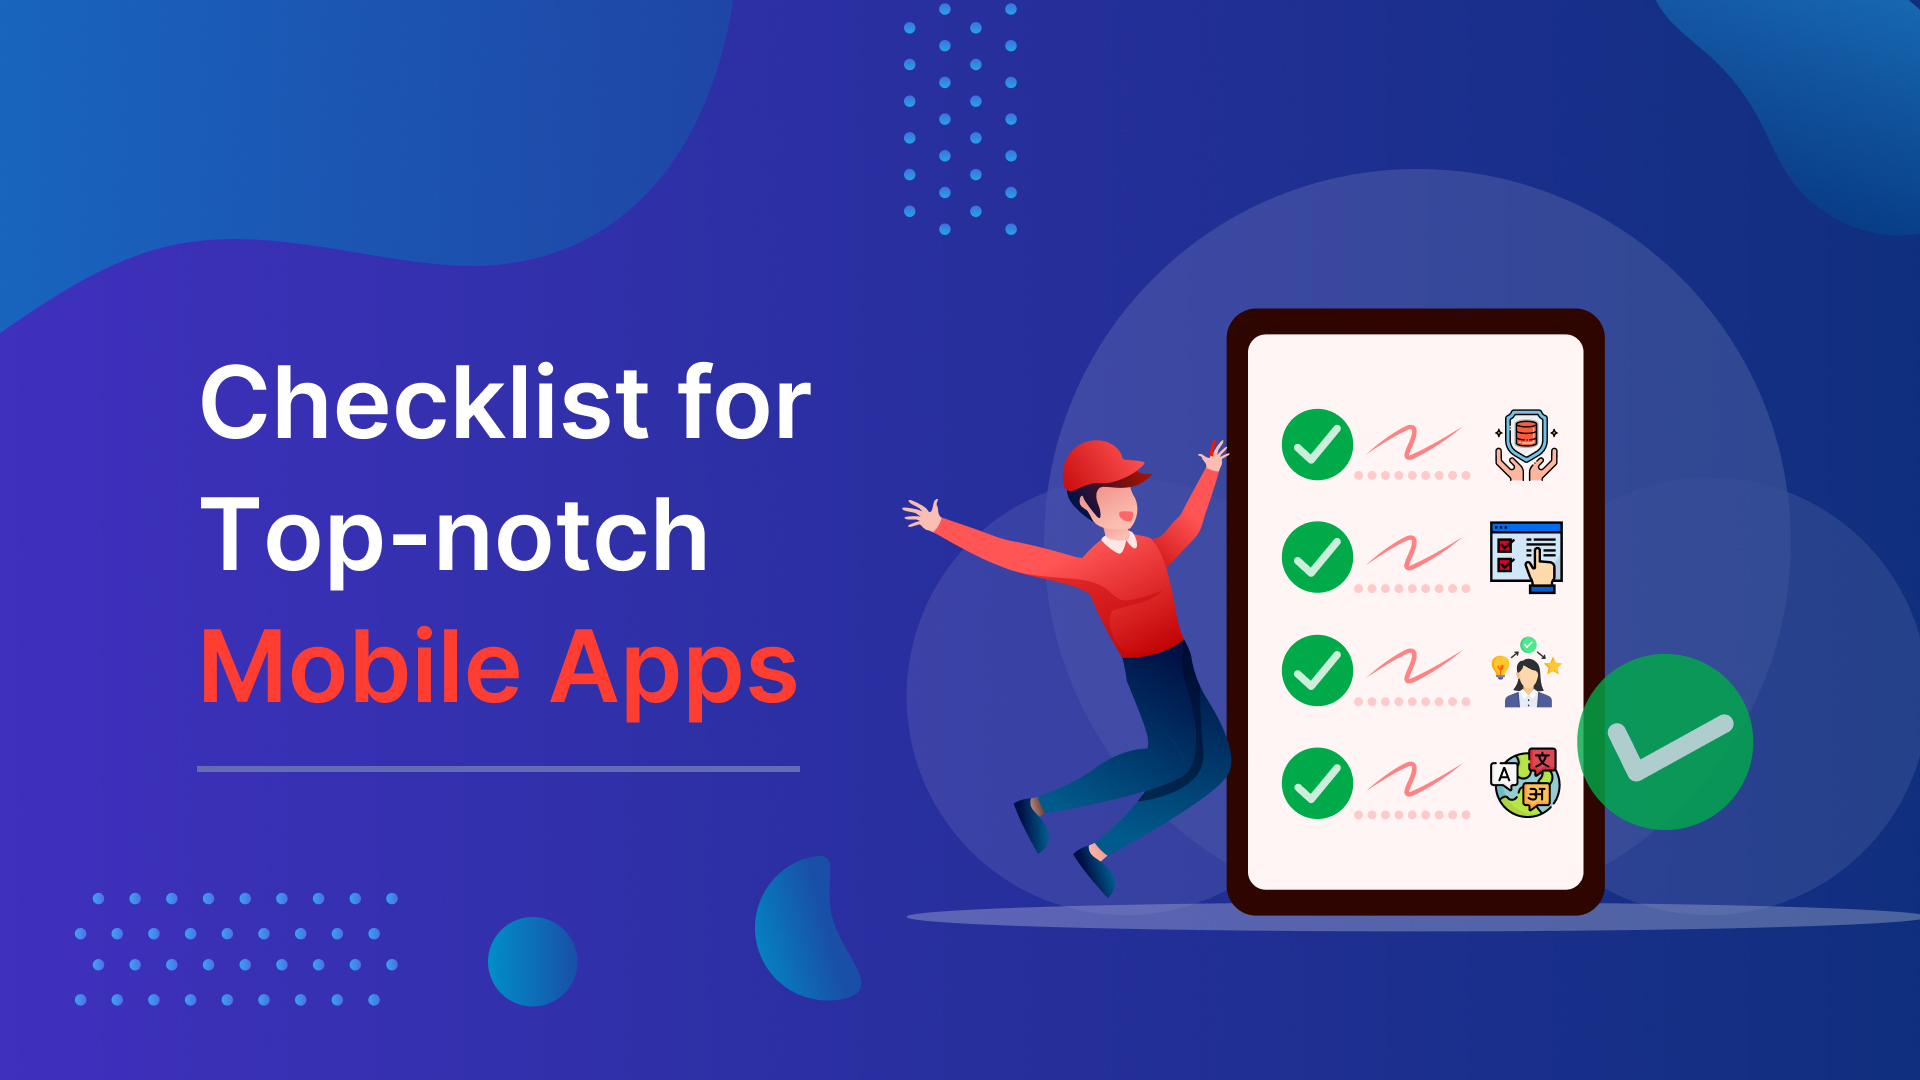 Checklist for top-notch mobile apps